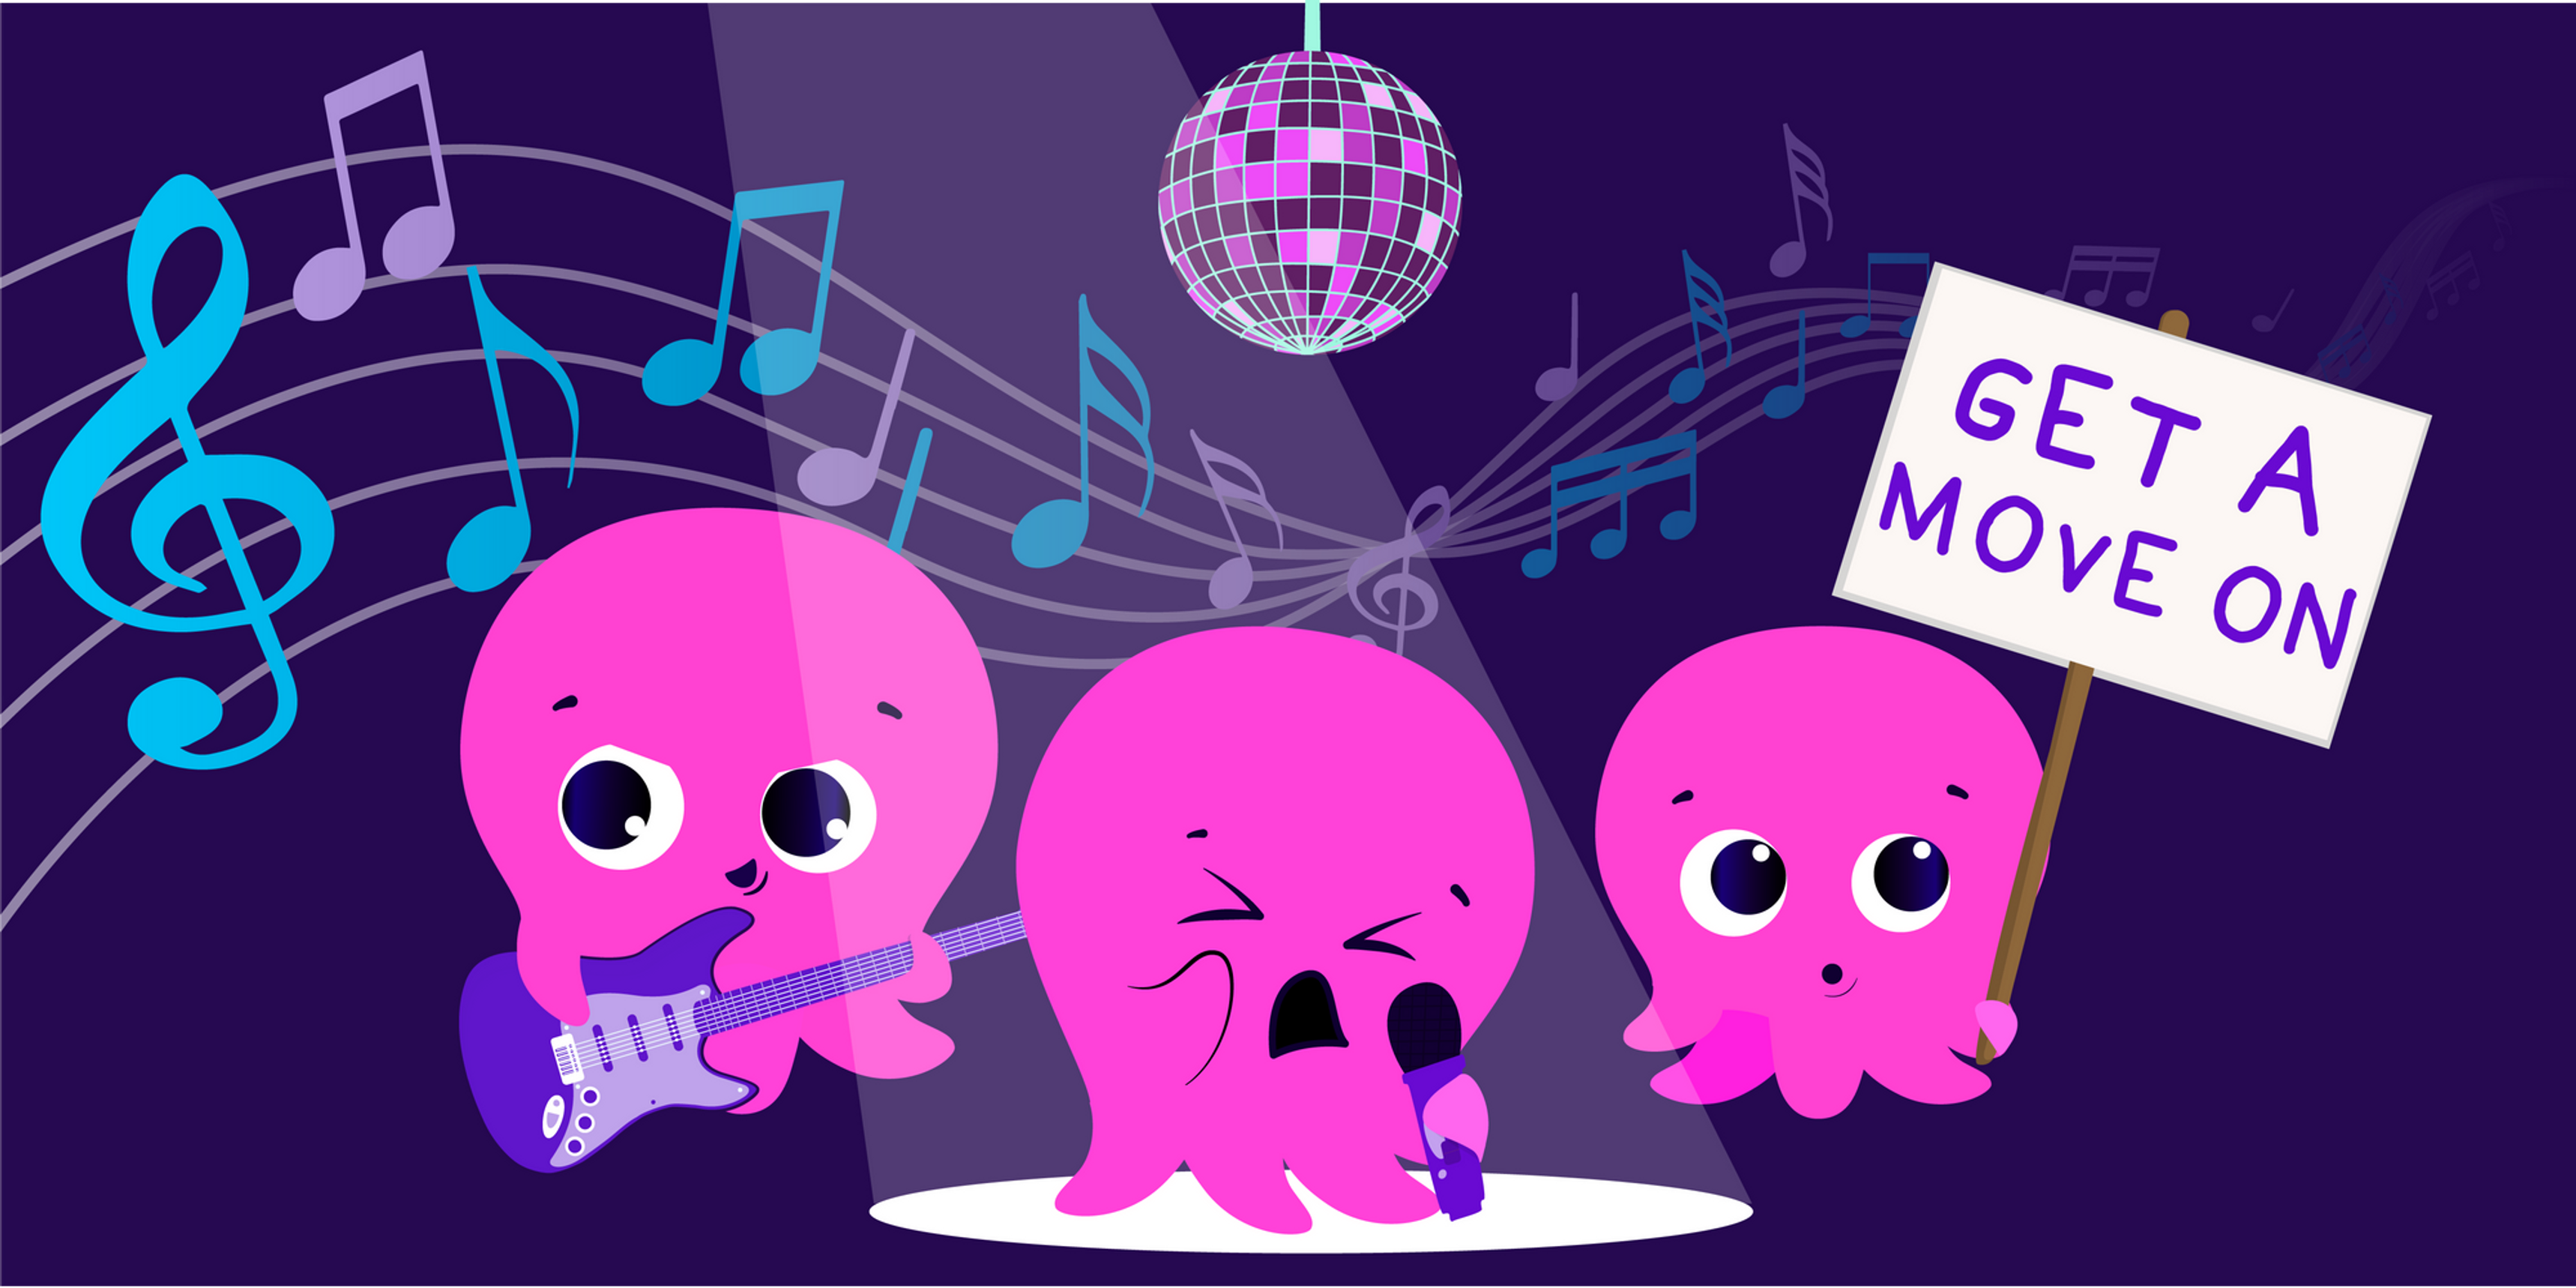 Three Constantines the pink Octopi are playing guitar, singing and holding a sign saying 'get a move on' under a wave of musical notes and a disco ball